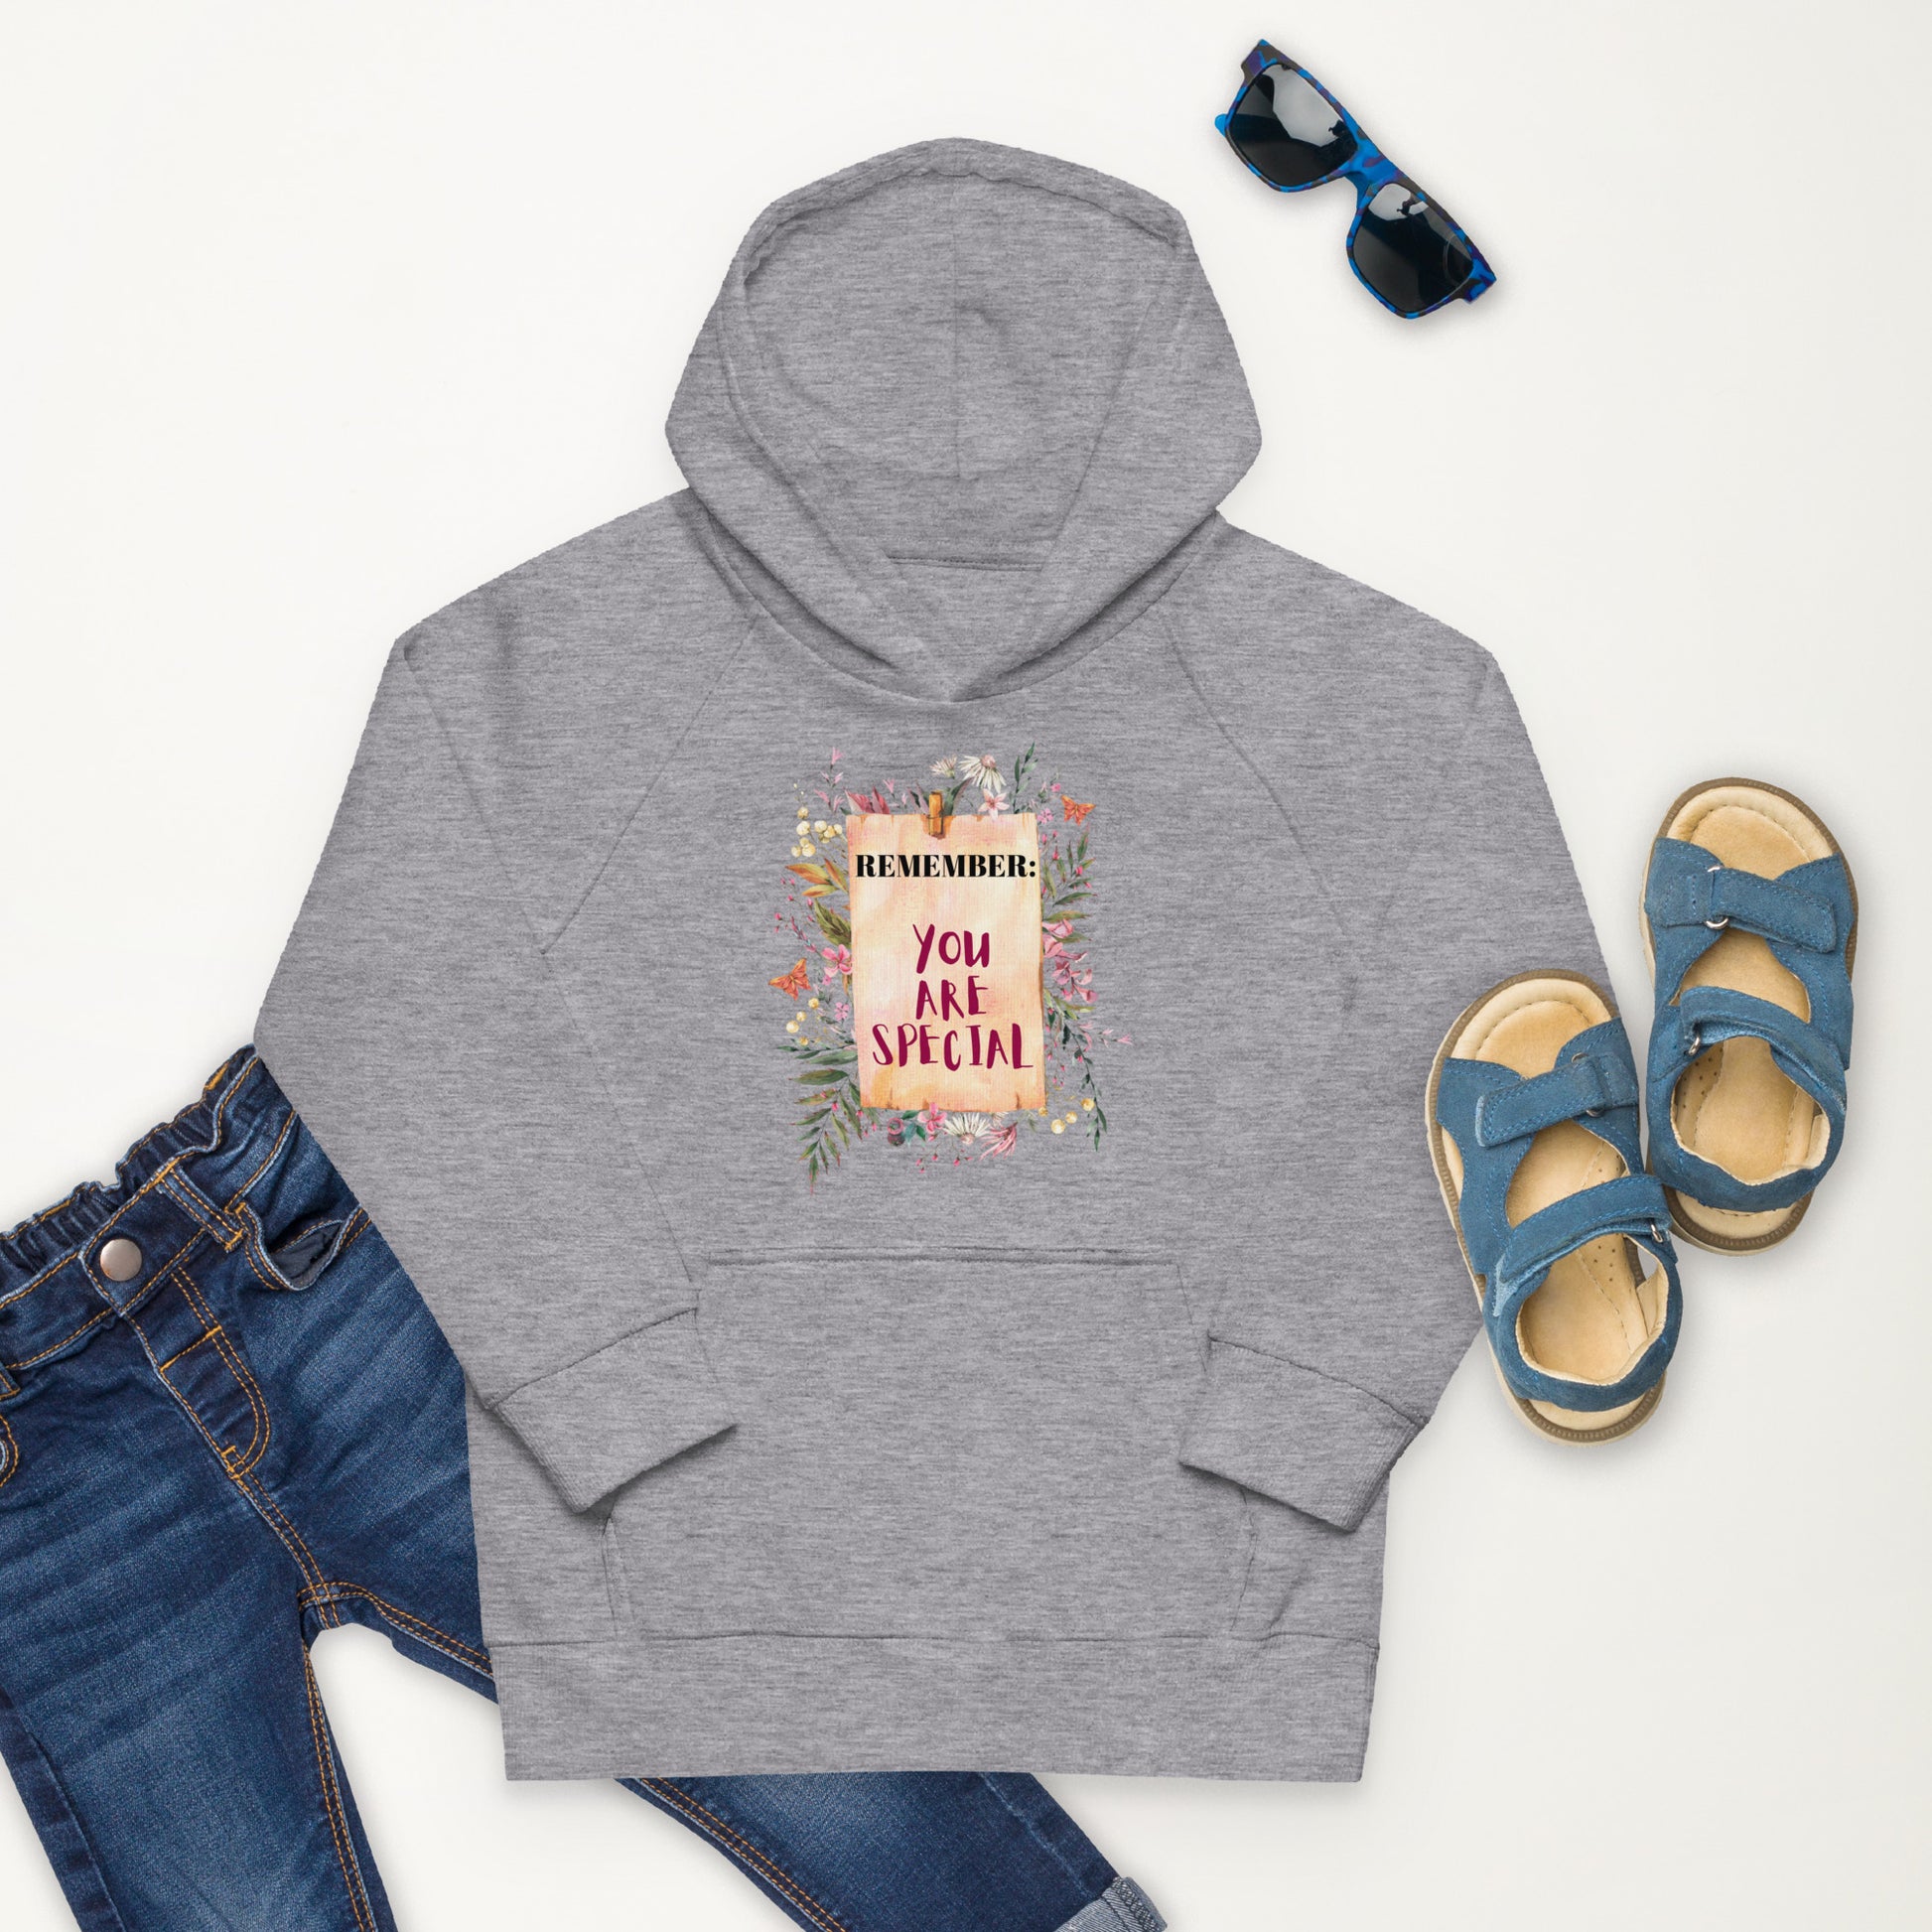 Inspirational Kids Pullover Organic Hoodie  featuring the powerful affirmation, "Remember, You Are Special." The vintage-inspired design, featuring a floral botanical reminder note, adds a touch of timeless elegance to their attire